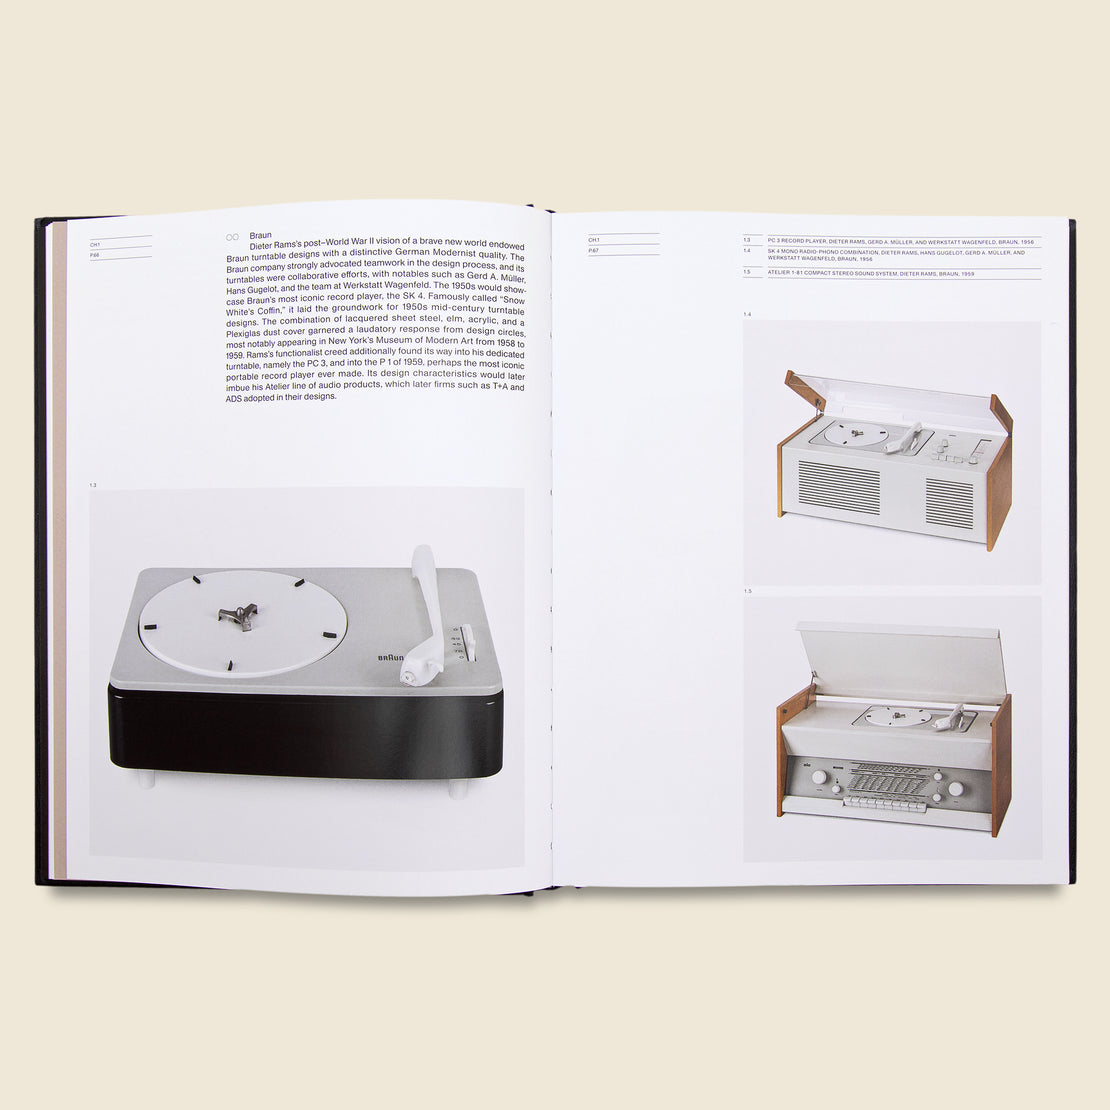 Revolution: The History of Turntable Design - Bookstore - STAG Provisions - Home - Library - Book